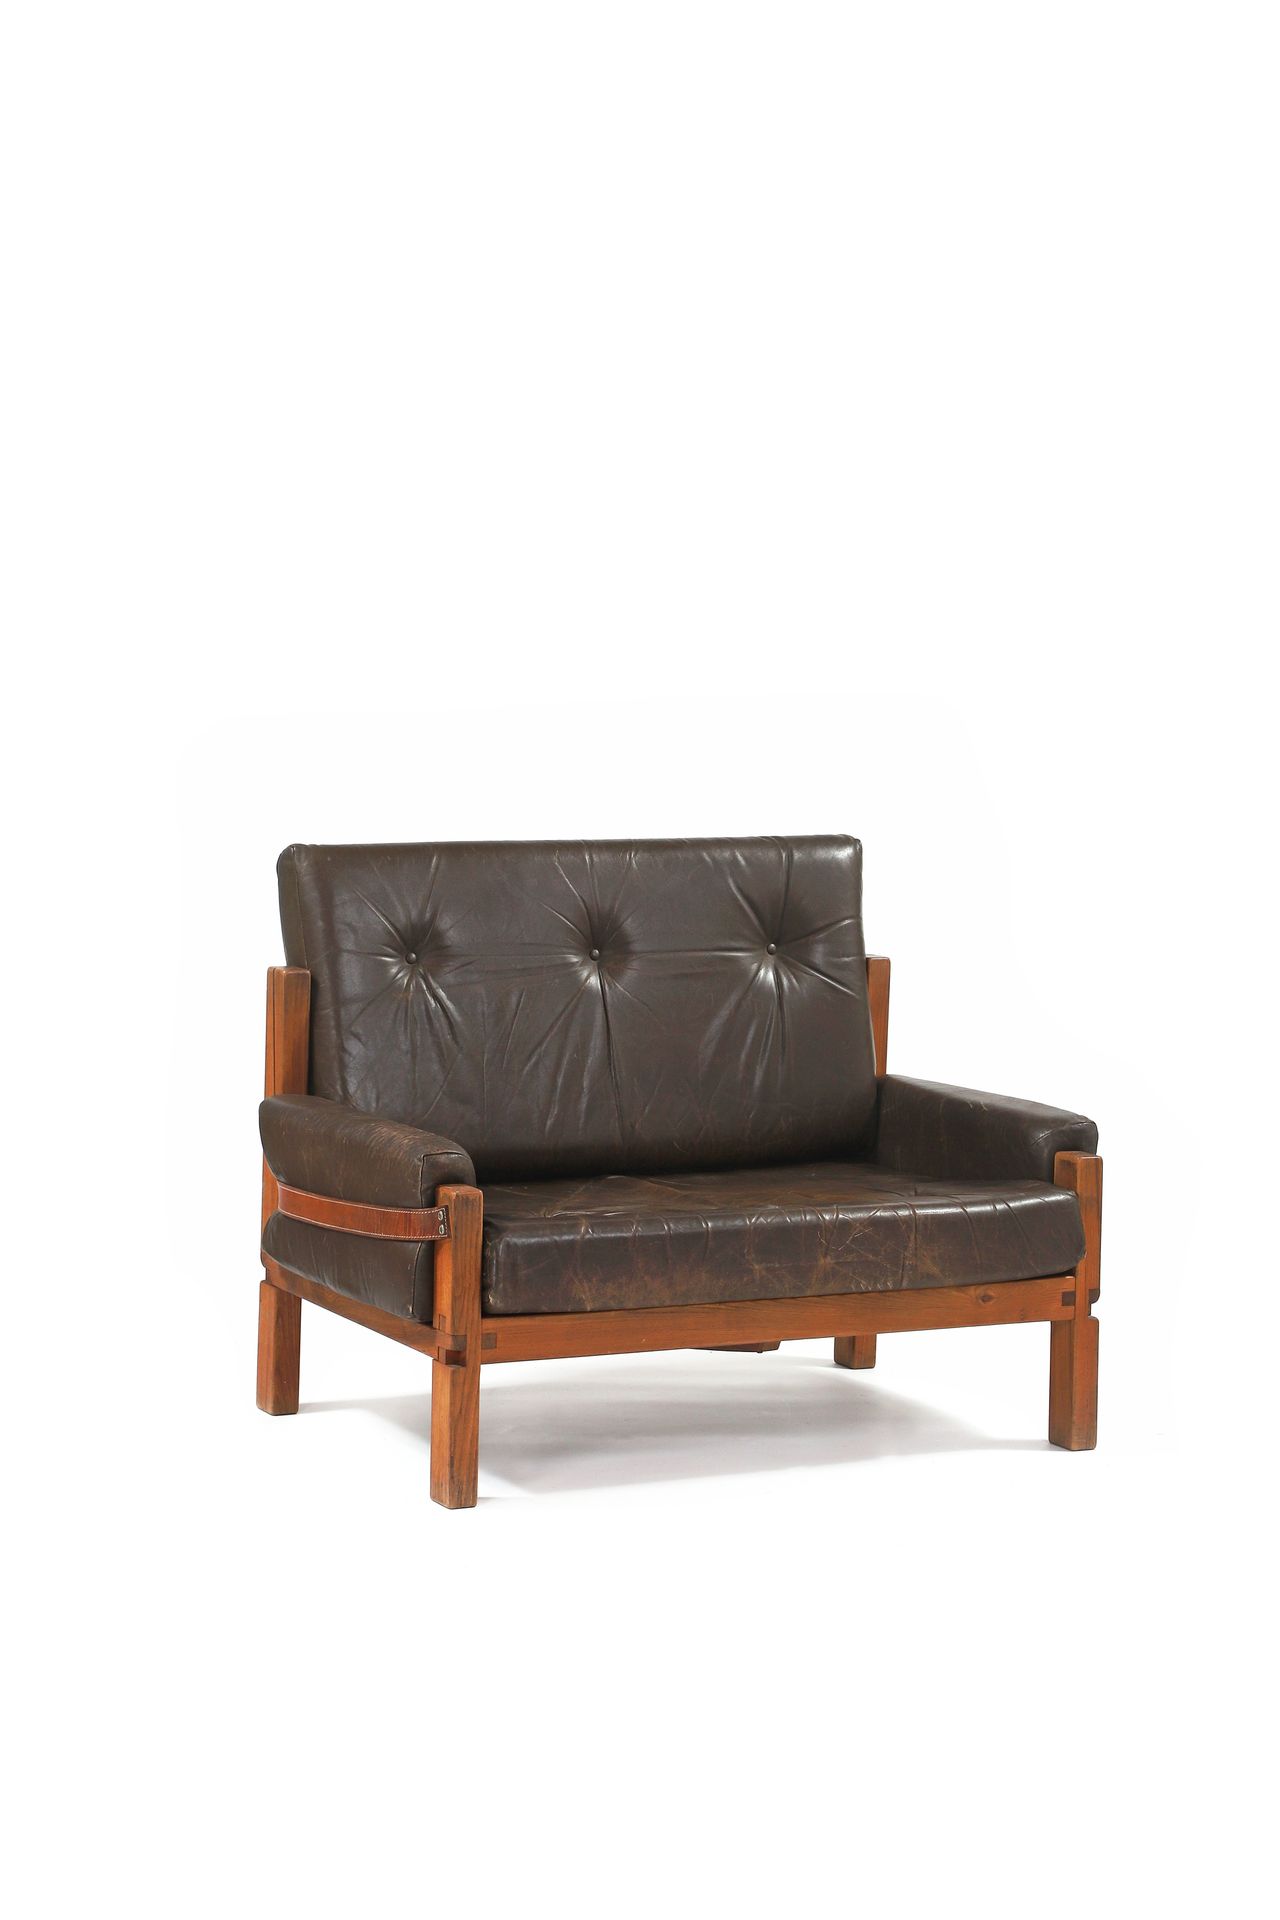 Null Pierre CHAPO (1927-1987) Bench known as S22 Elm, leather 72 x 137 x 75 cm. &hellip;